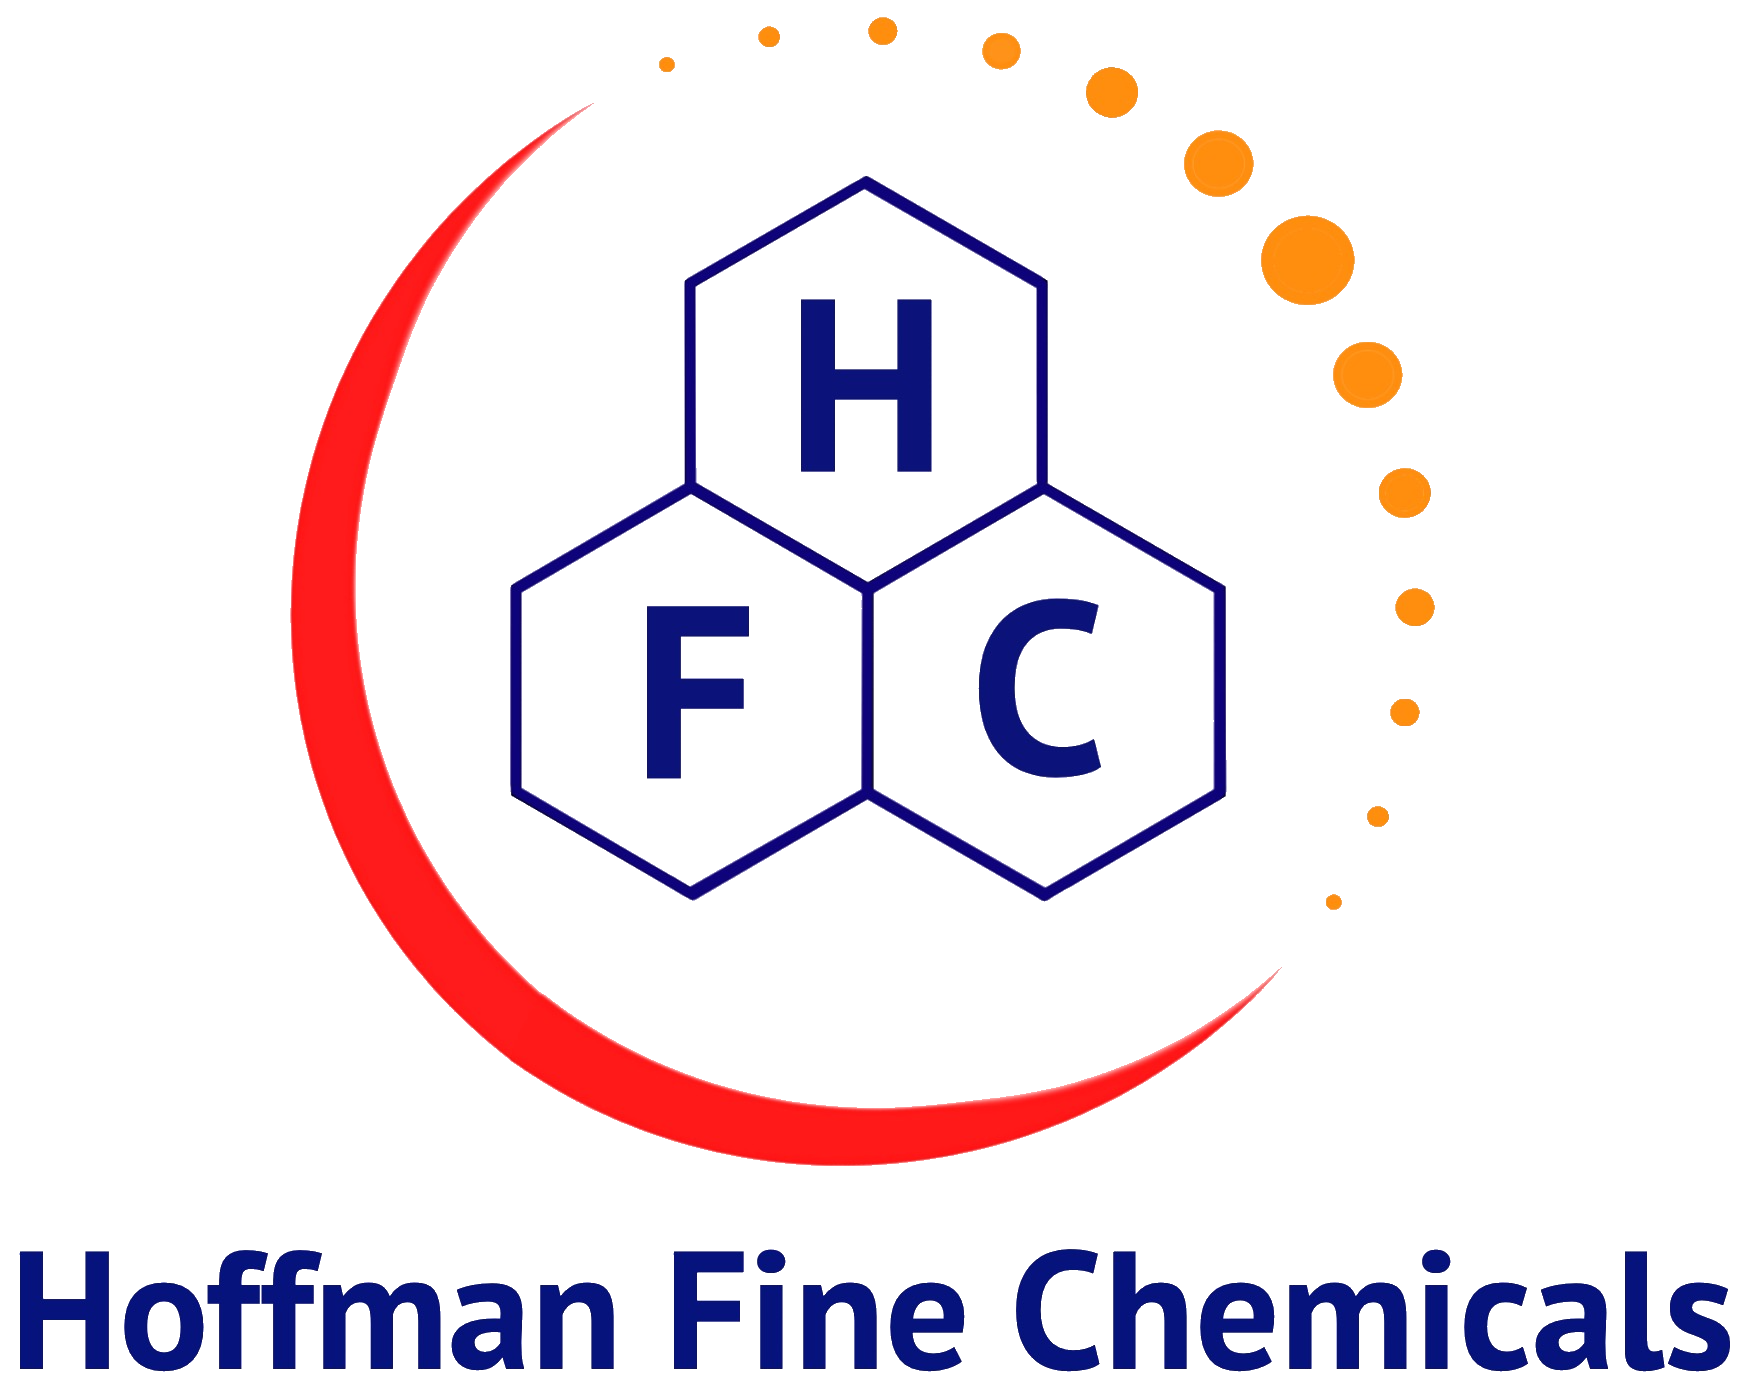 About Hoffman Fine Chemicals.